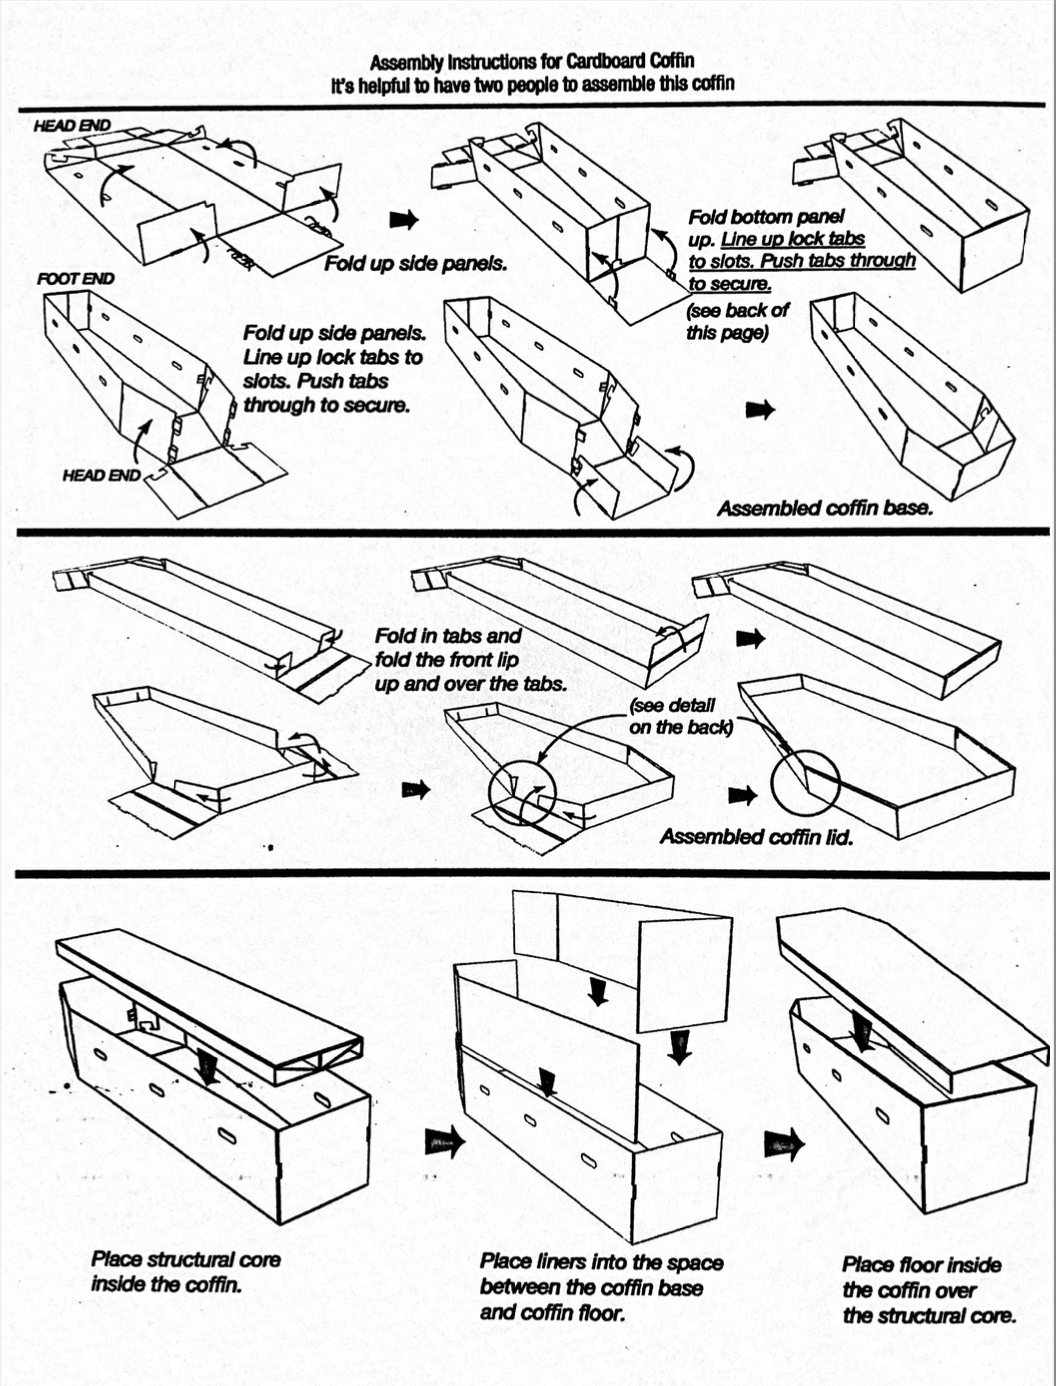 Assembly Page 1 For Cardboard Coffin 